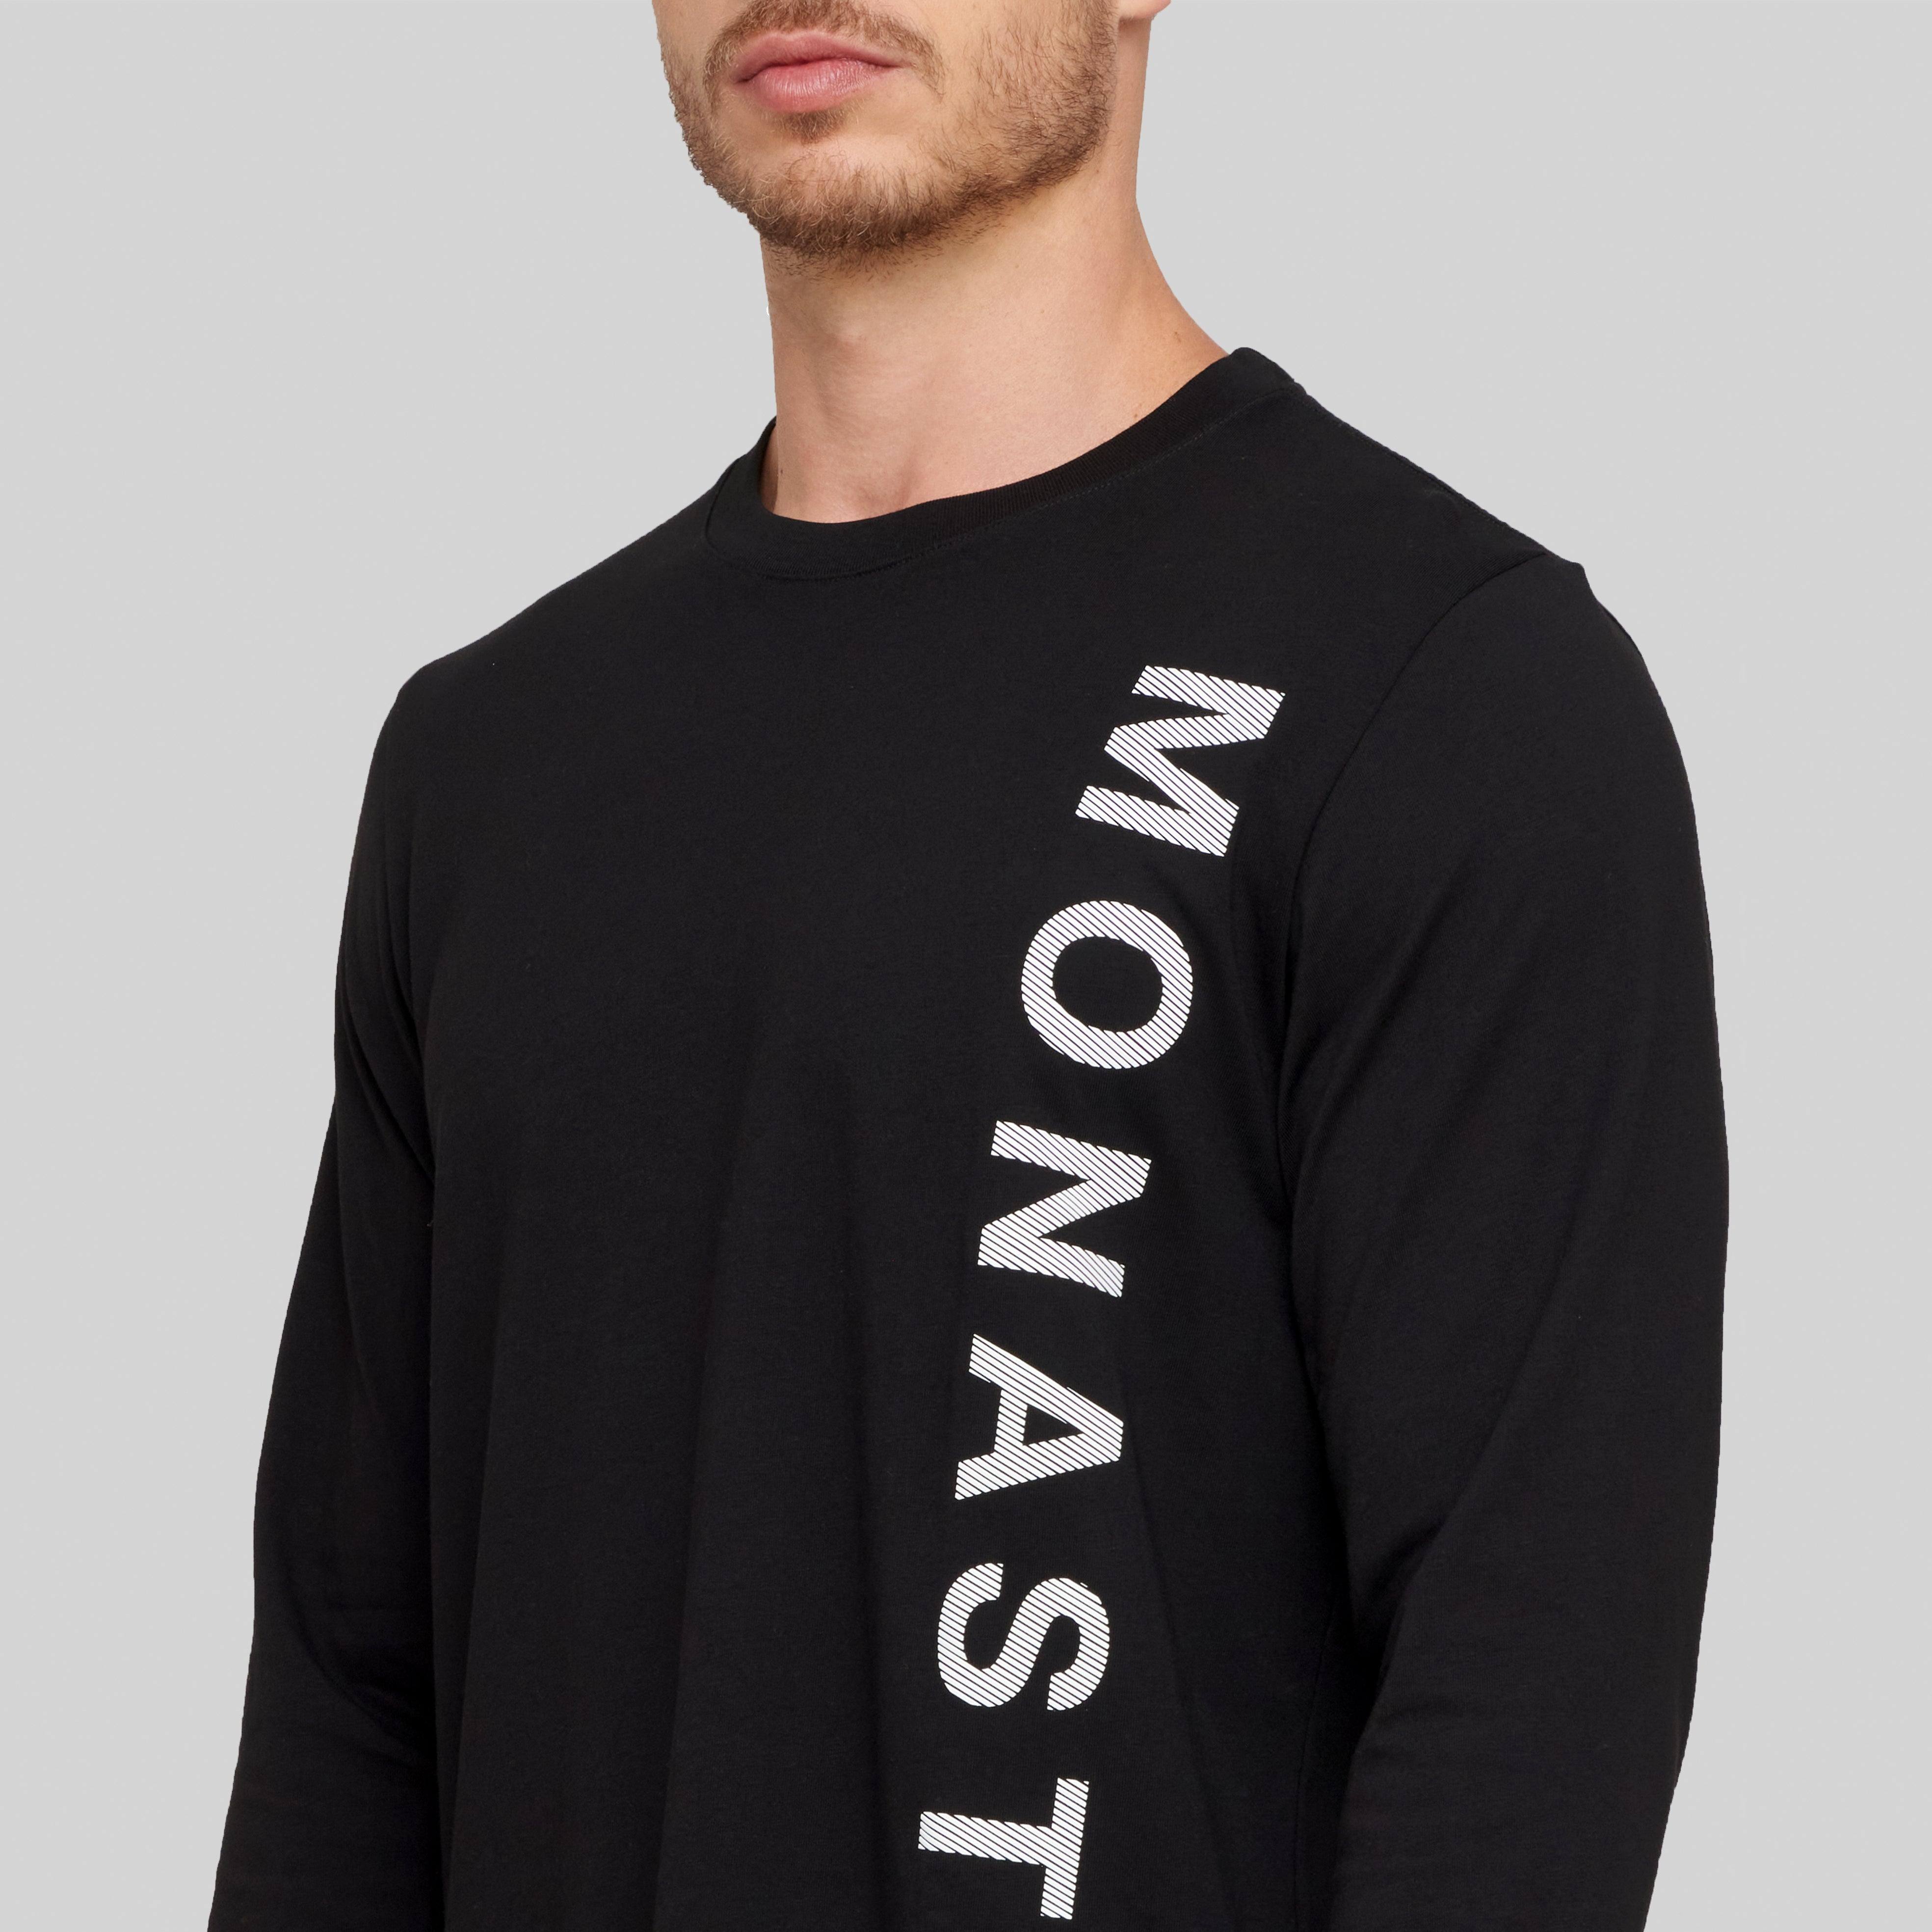 CERES BLACK LONG SLEEVE | Monastery Couture